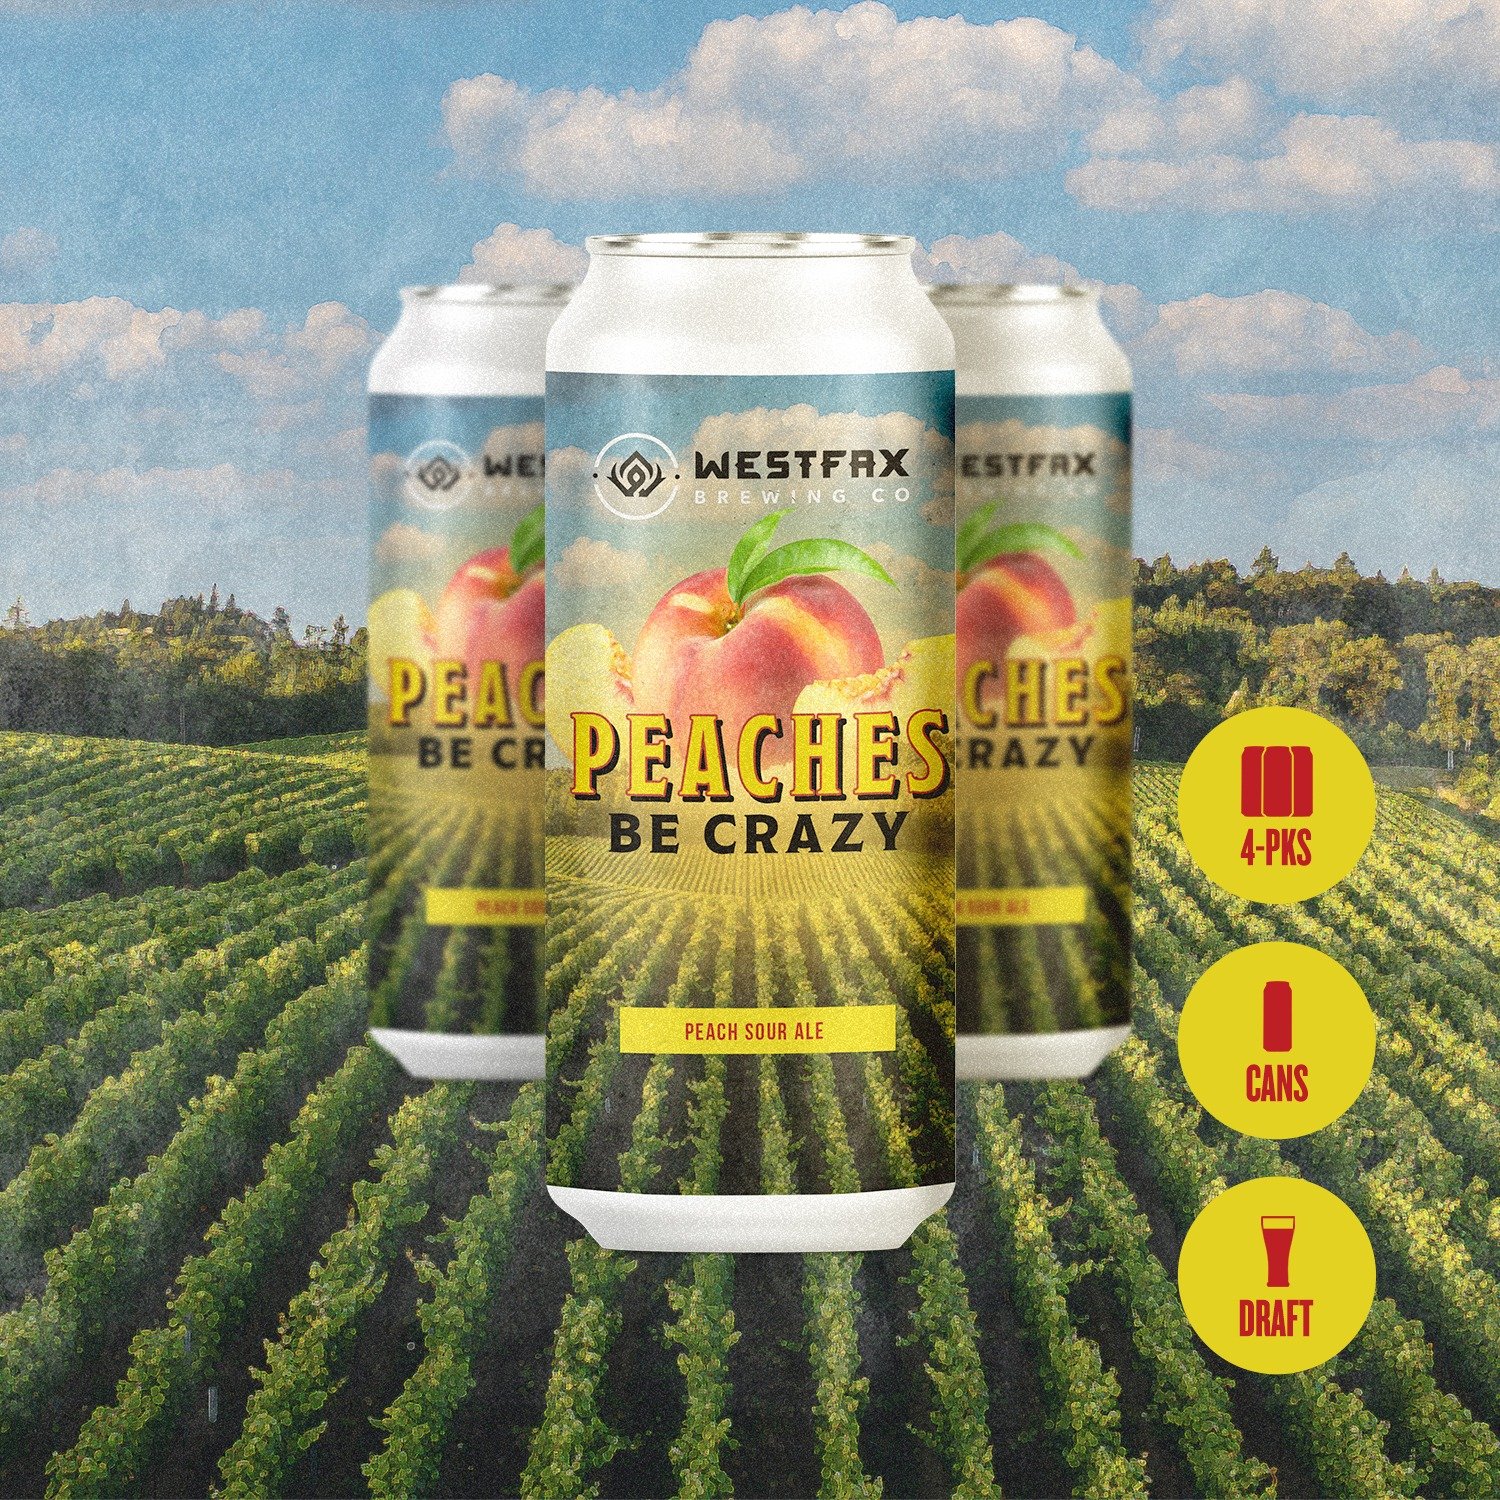 3X juicy releases coming your way this week! 🍑 🍋

Available on 4/20:

𝐏𝐞𝐚𝐜𝐡𝐞𝐬 𝐁𝐞 𝐂𝐫𝐚𝐳𝐲 | 𝐒𝐨𝐮𝐫 | 𝐀𝐁𝐕: 𝟓.𝟓%
A peach sour ale boasting aromas and flavors of peach with a tart crisp finish.&quot;
✅Draft, 16oz Single Cans &amp; 16